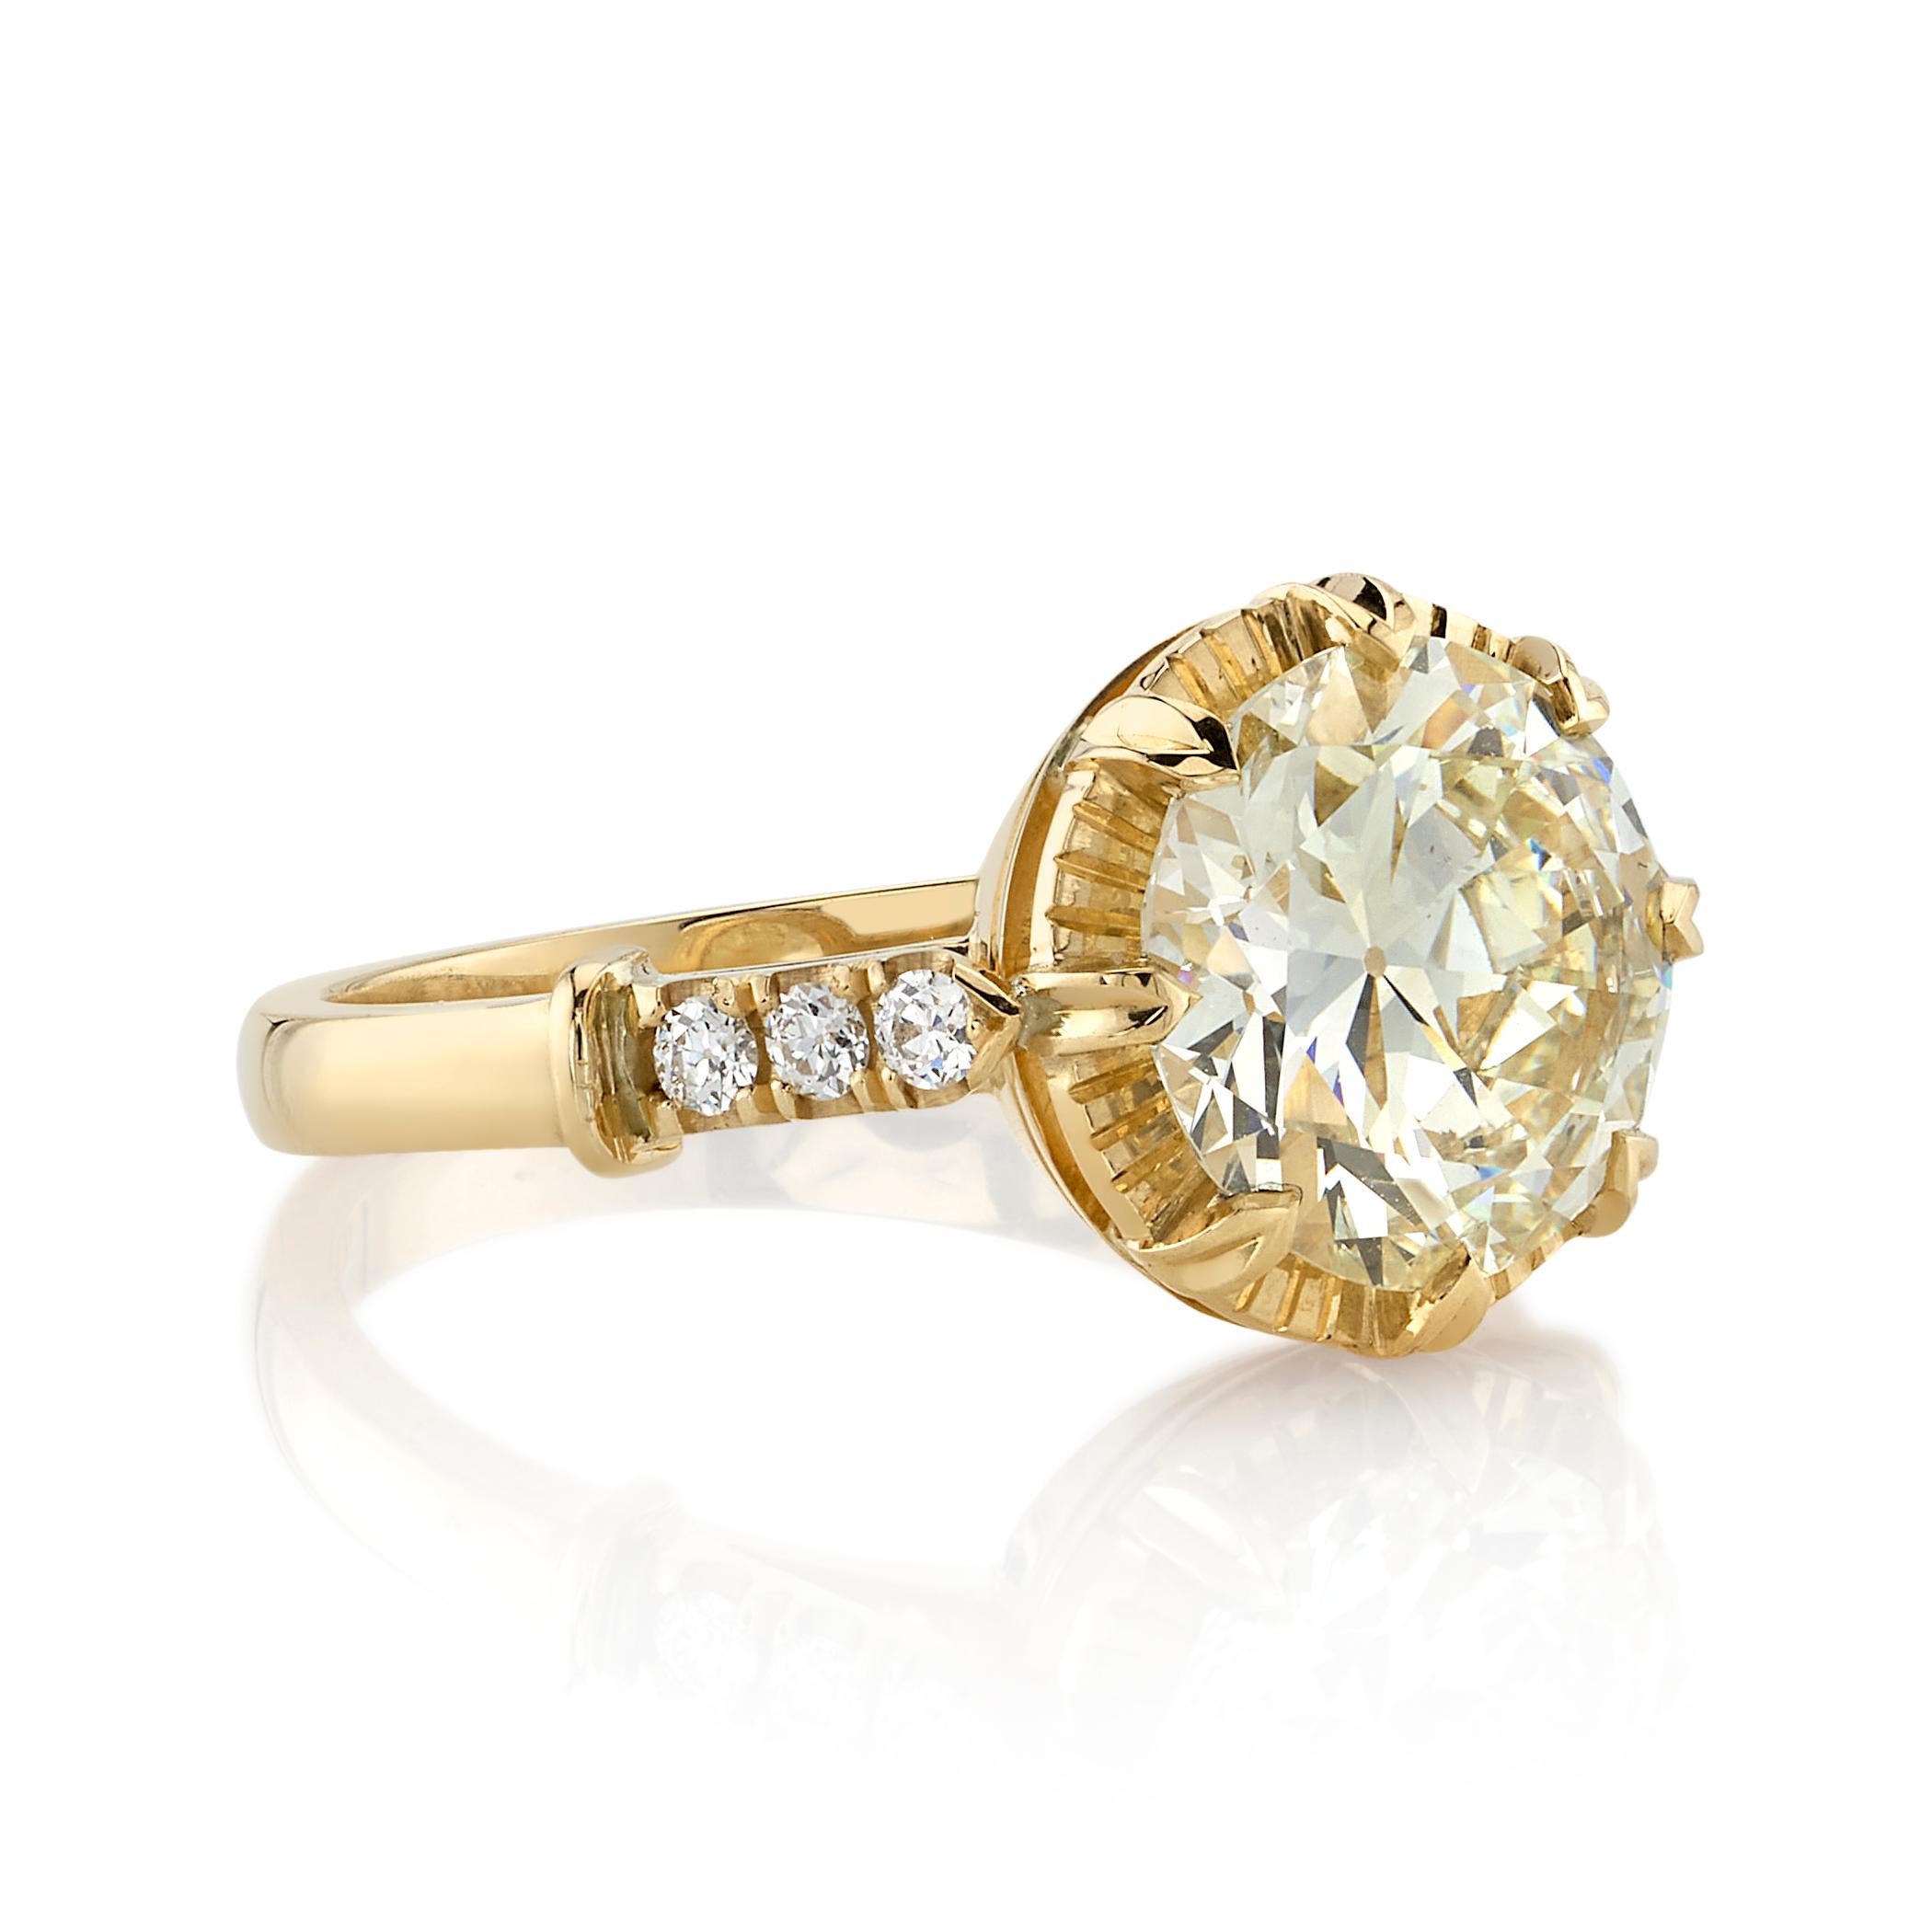 2.69ct N-SI1 GIA certified old European cut diamond with 0.12ctw old European cut accent diamonds set in a handcrafted 18K yellow gold mounting.

Ring is currently a size 6 and can be sized to fit. 

Our jewelry is made locally in Los Angeles and